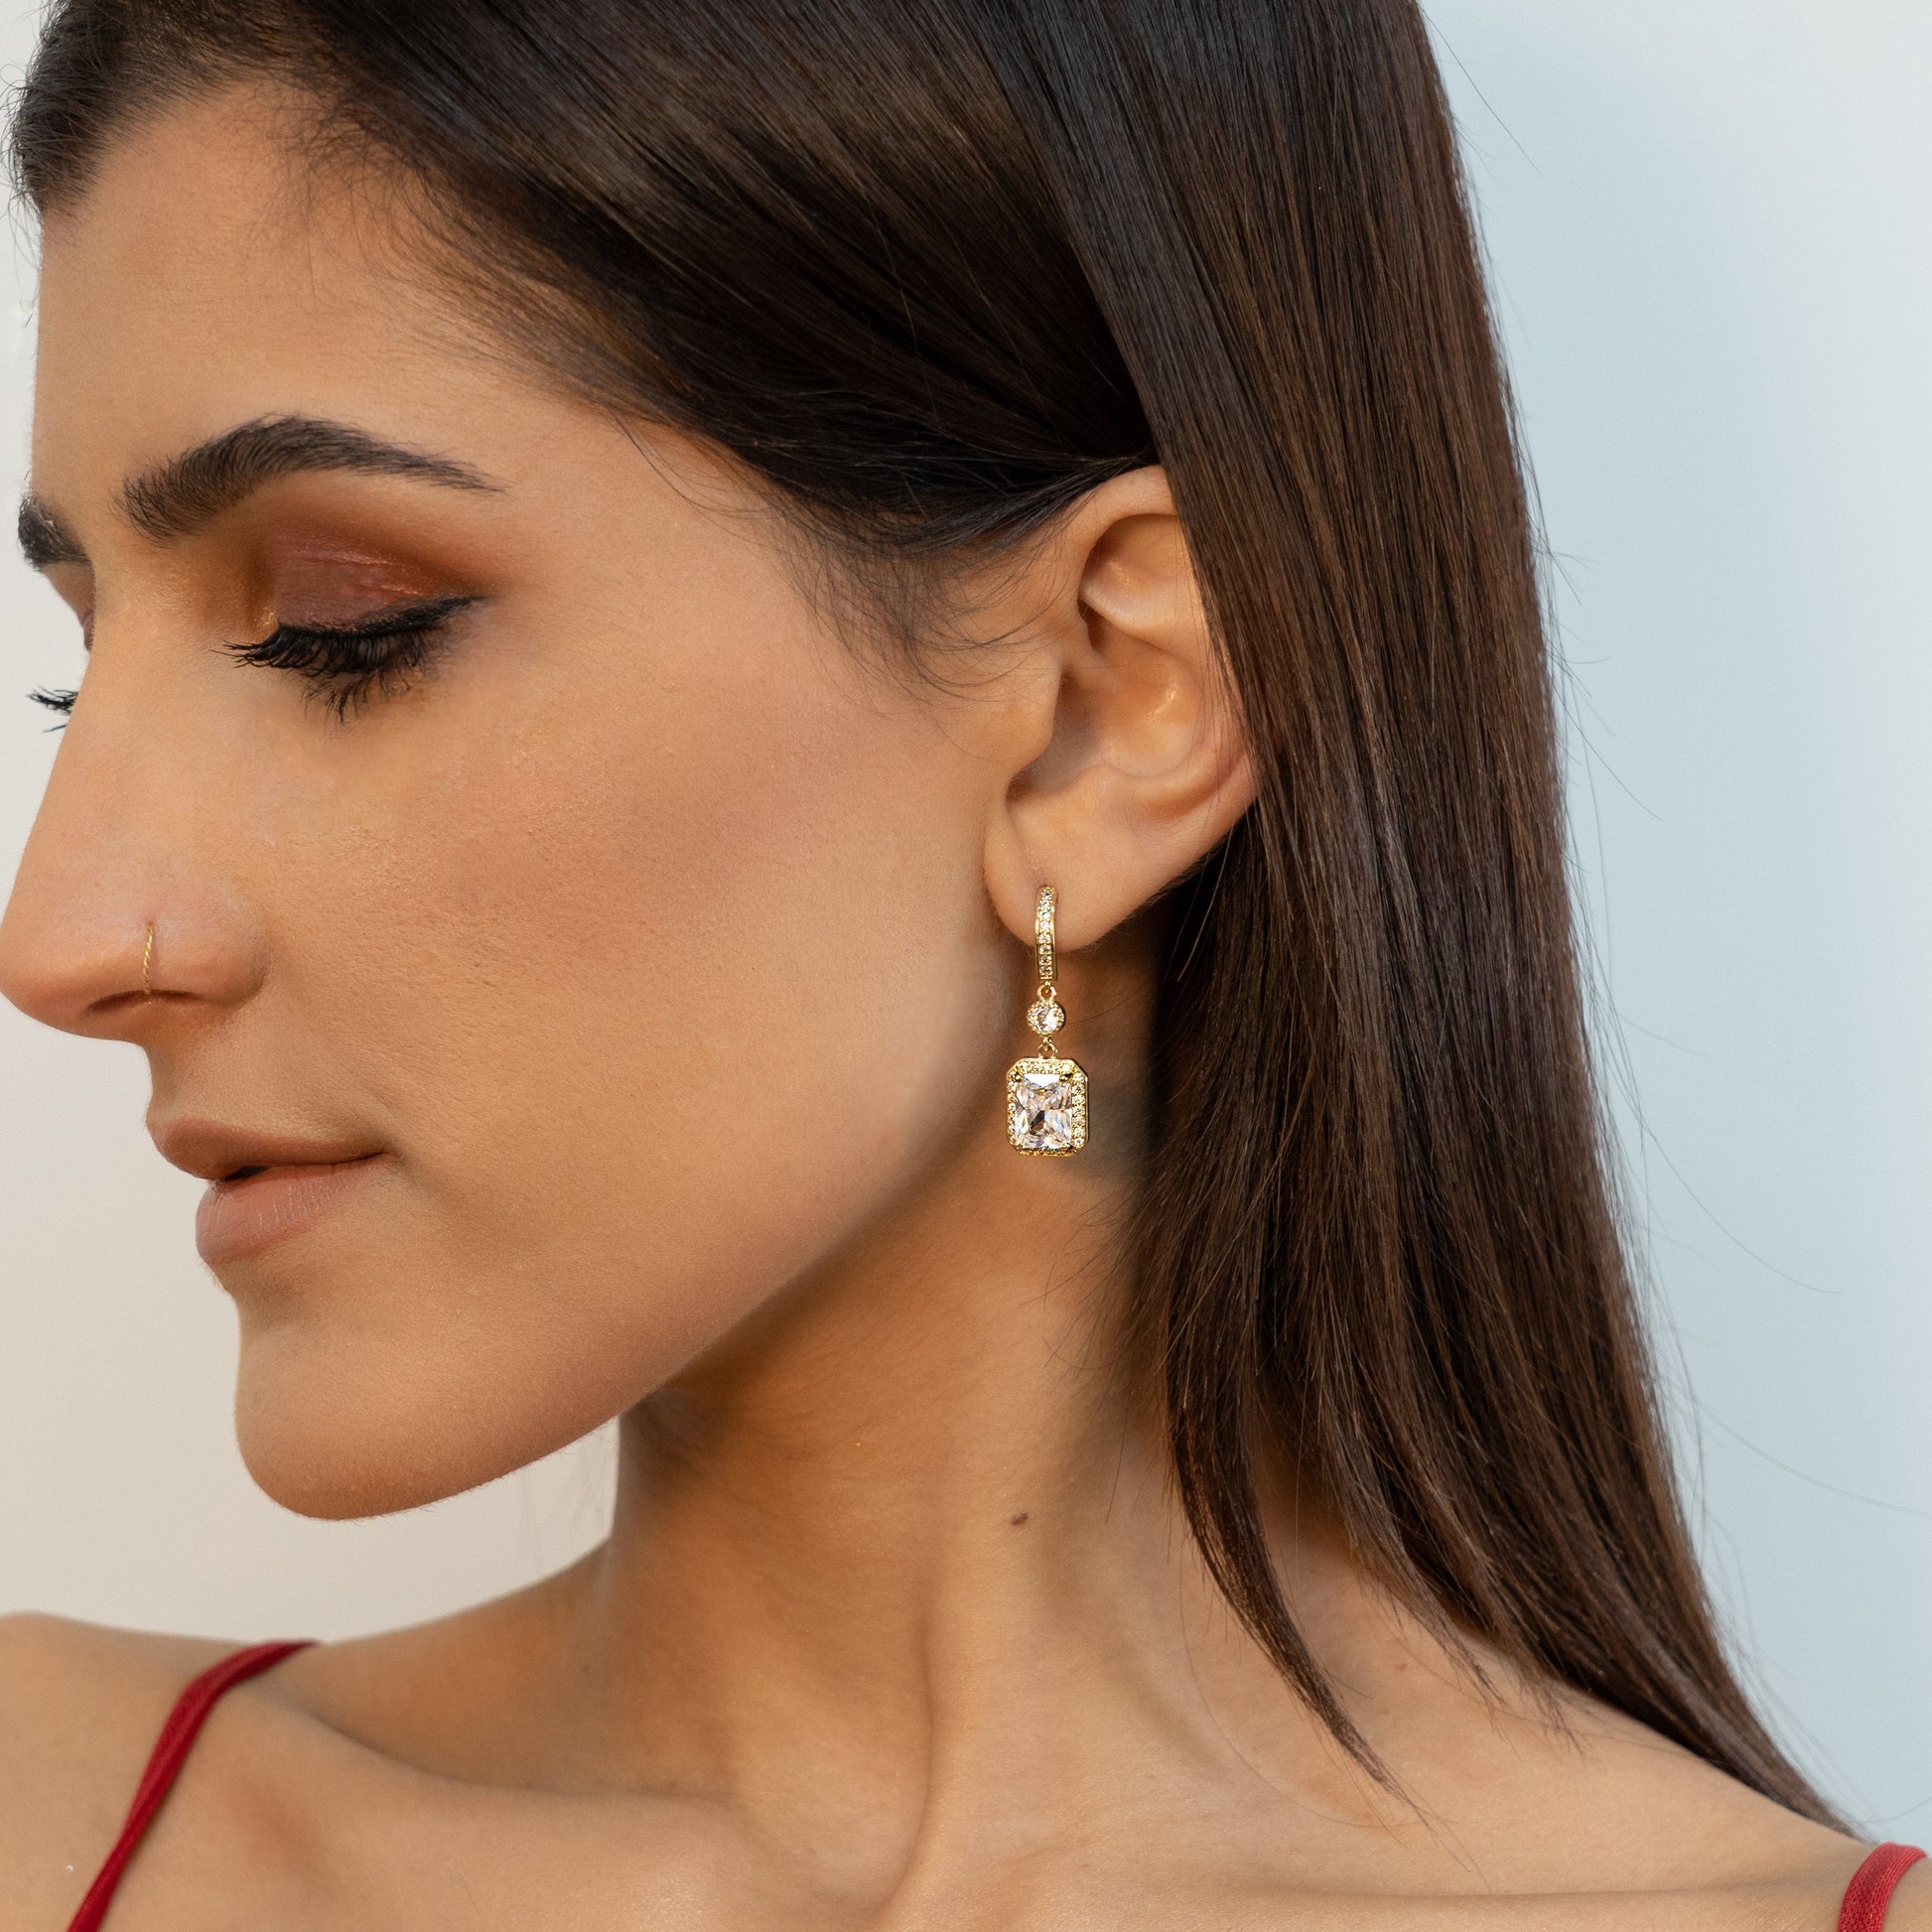 bianco rosso Earrings White Exotique Sparkle Iconic Earrings (E-2100) cyprus greece jewelry gift free shipping europe worldwide